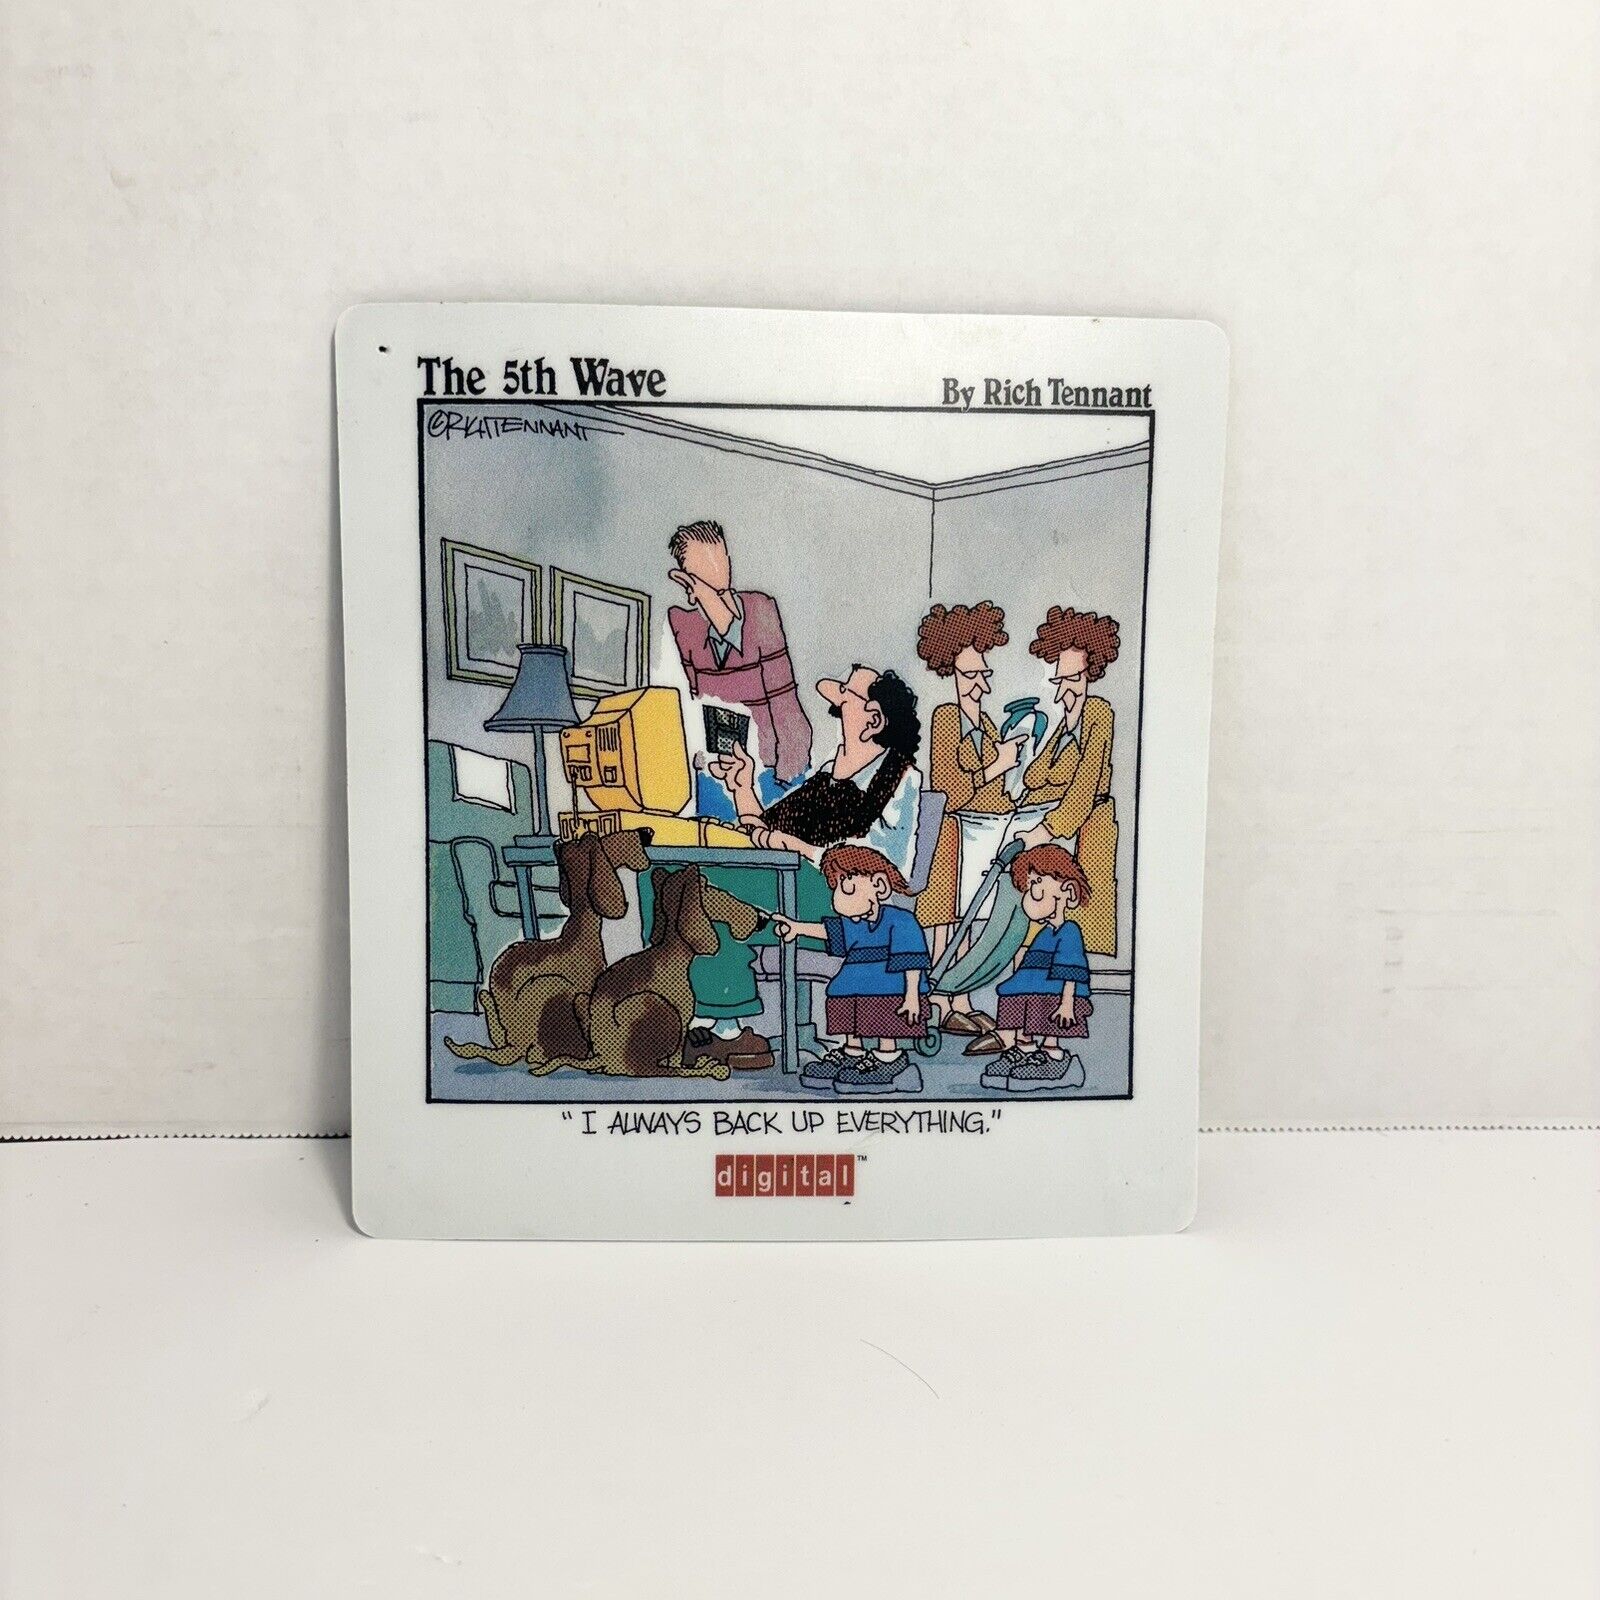 The 5th Wave Mouse Pad By Rich Tennant / Vintage / Comic Strip / 1980's